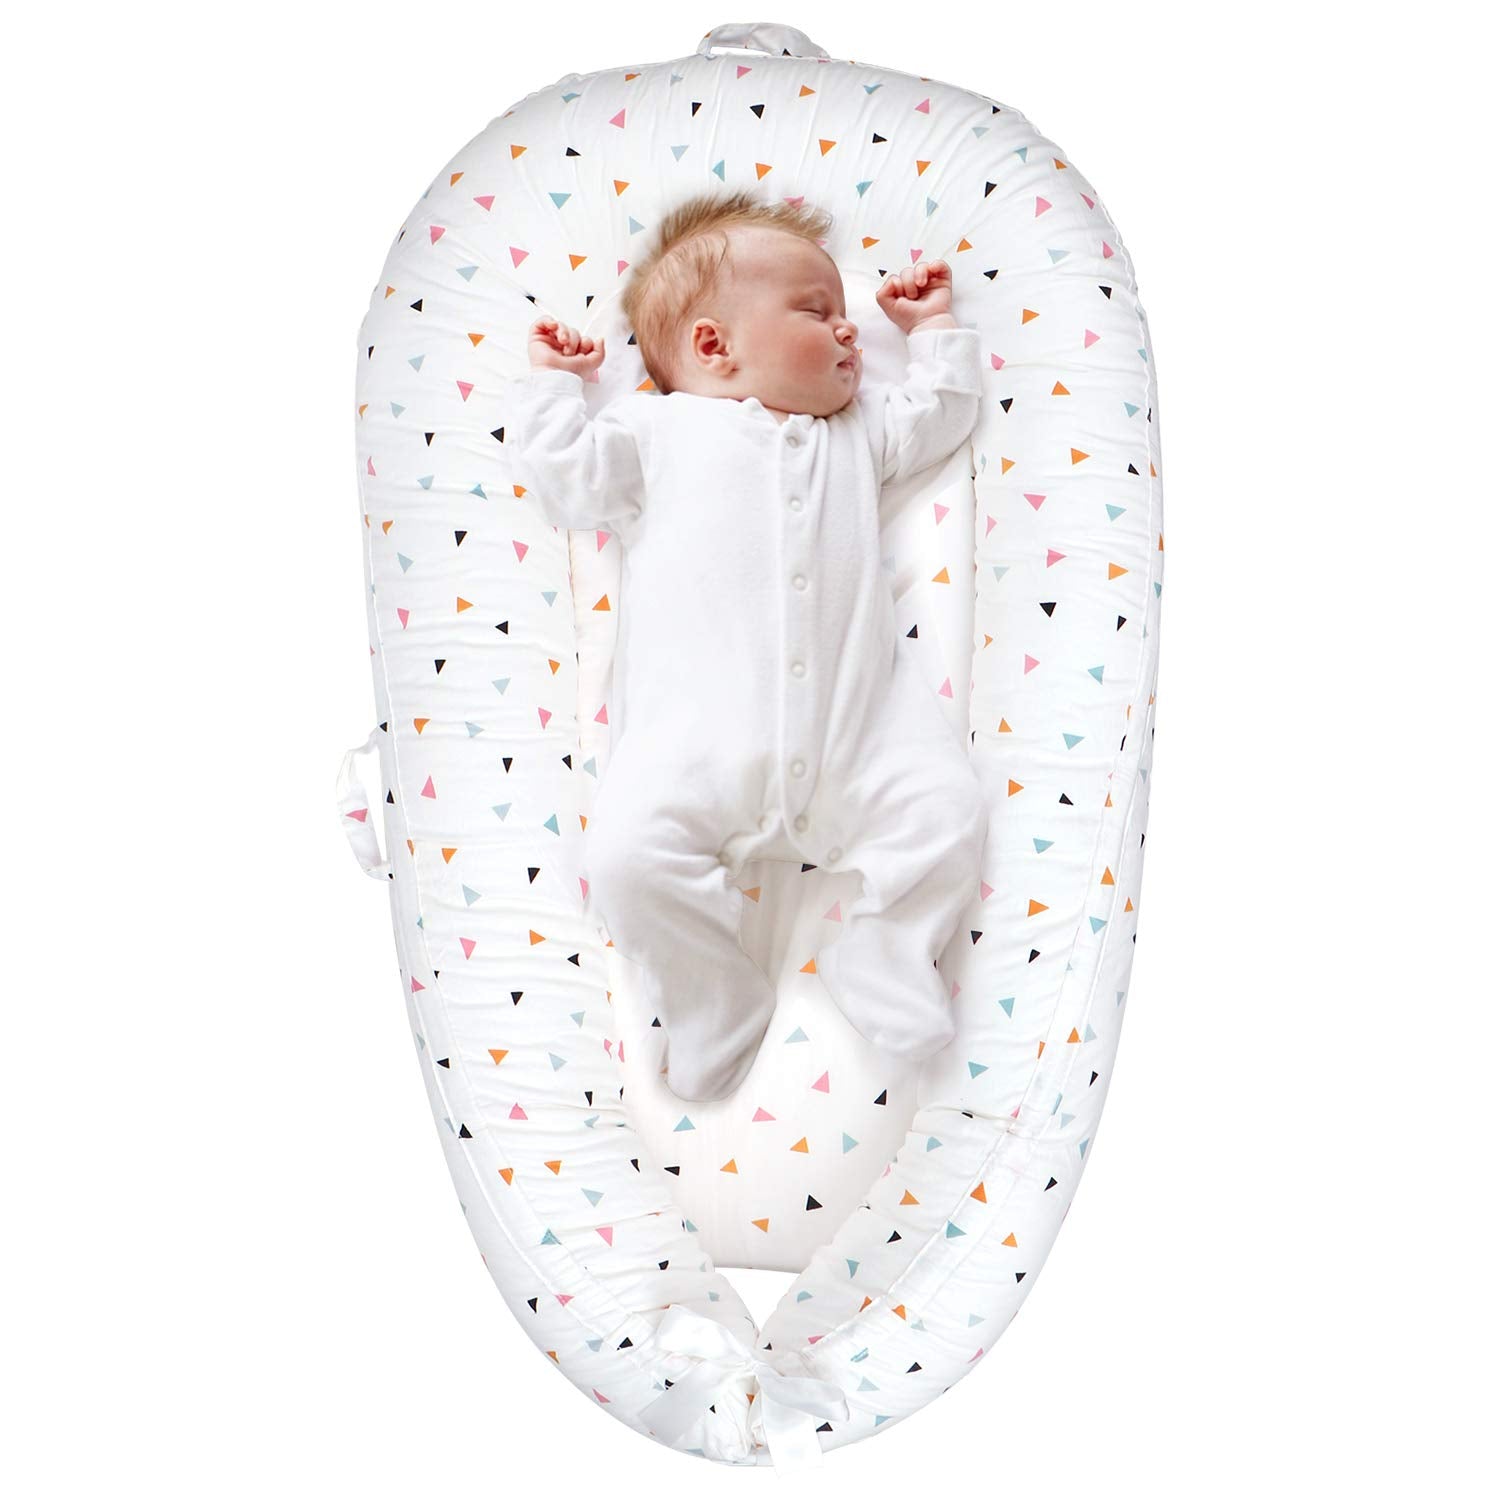 Baby Lounger & Baby Nest Co Sleep Portable Newborn Lounger, 100% Breathable Cotton & Ultra Soft Infant Lounger